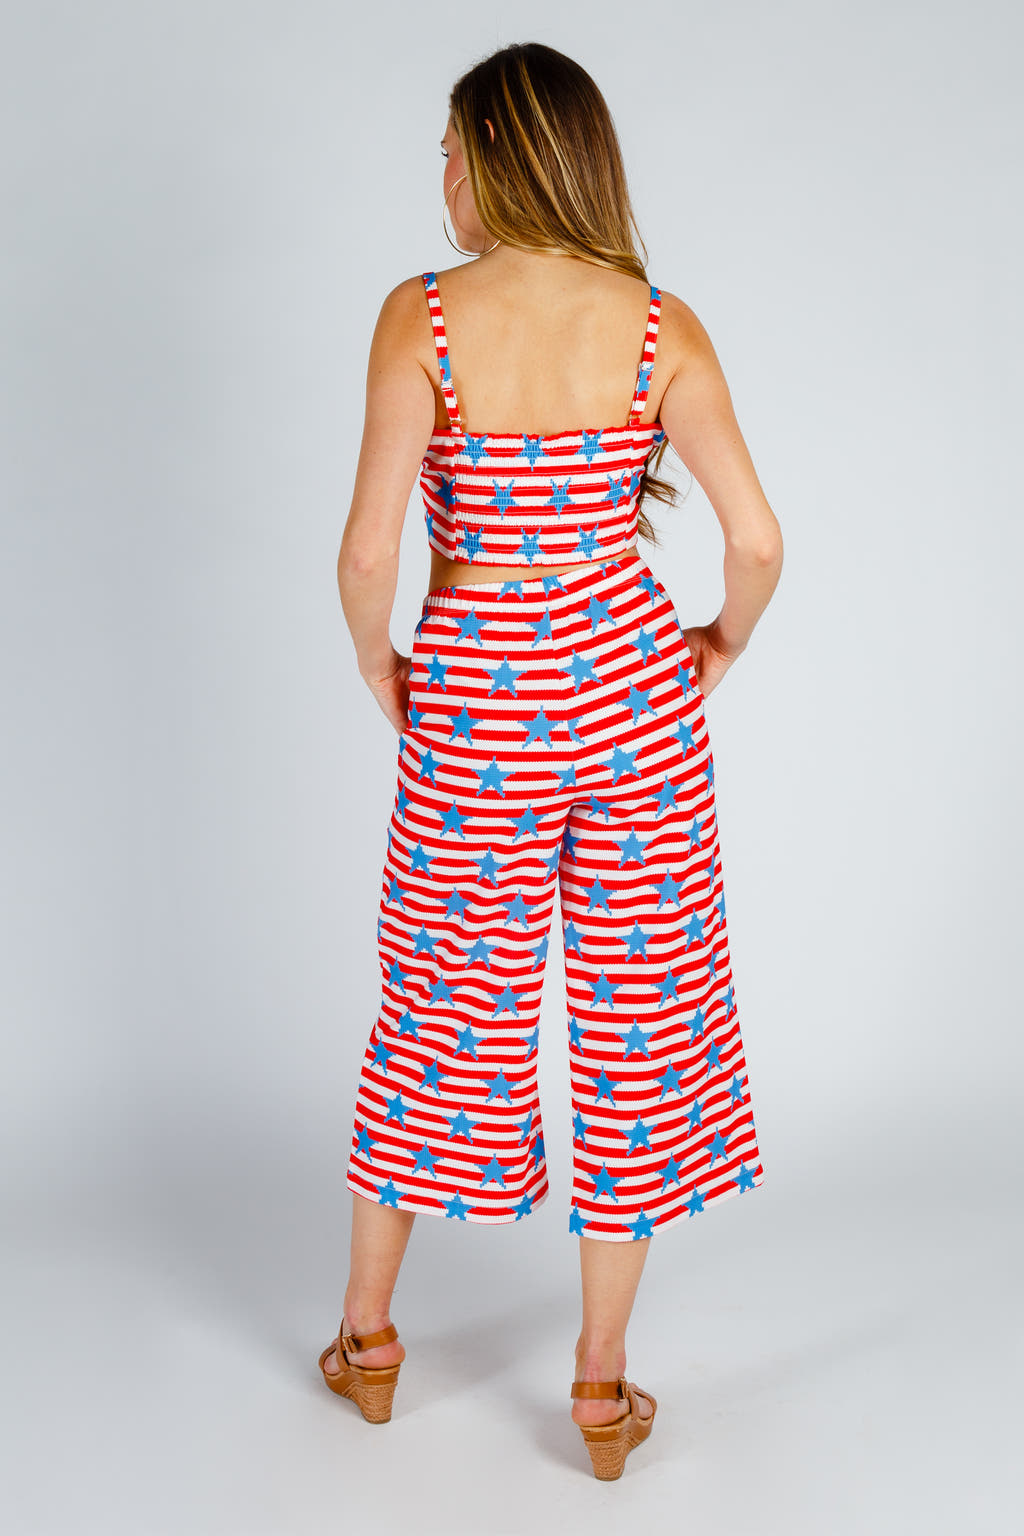 Gals red white and blue 2 piece outfit